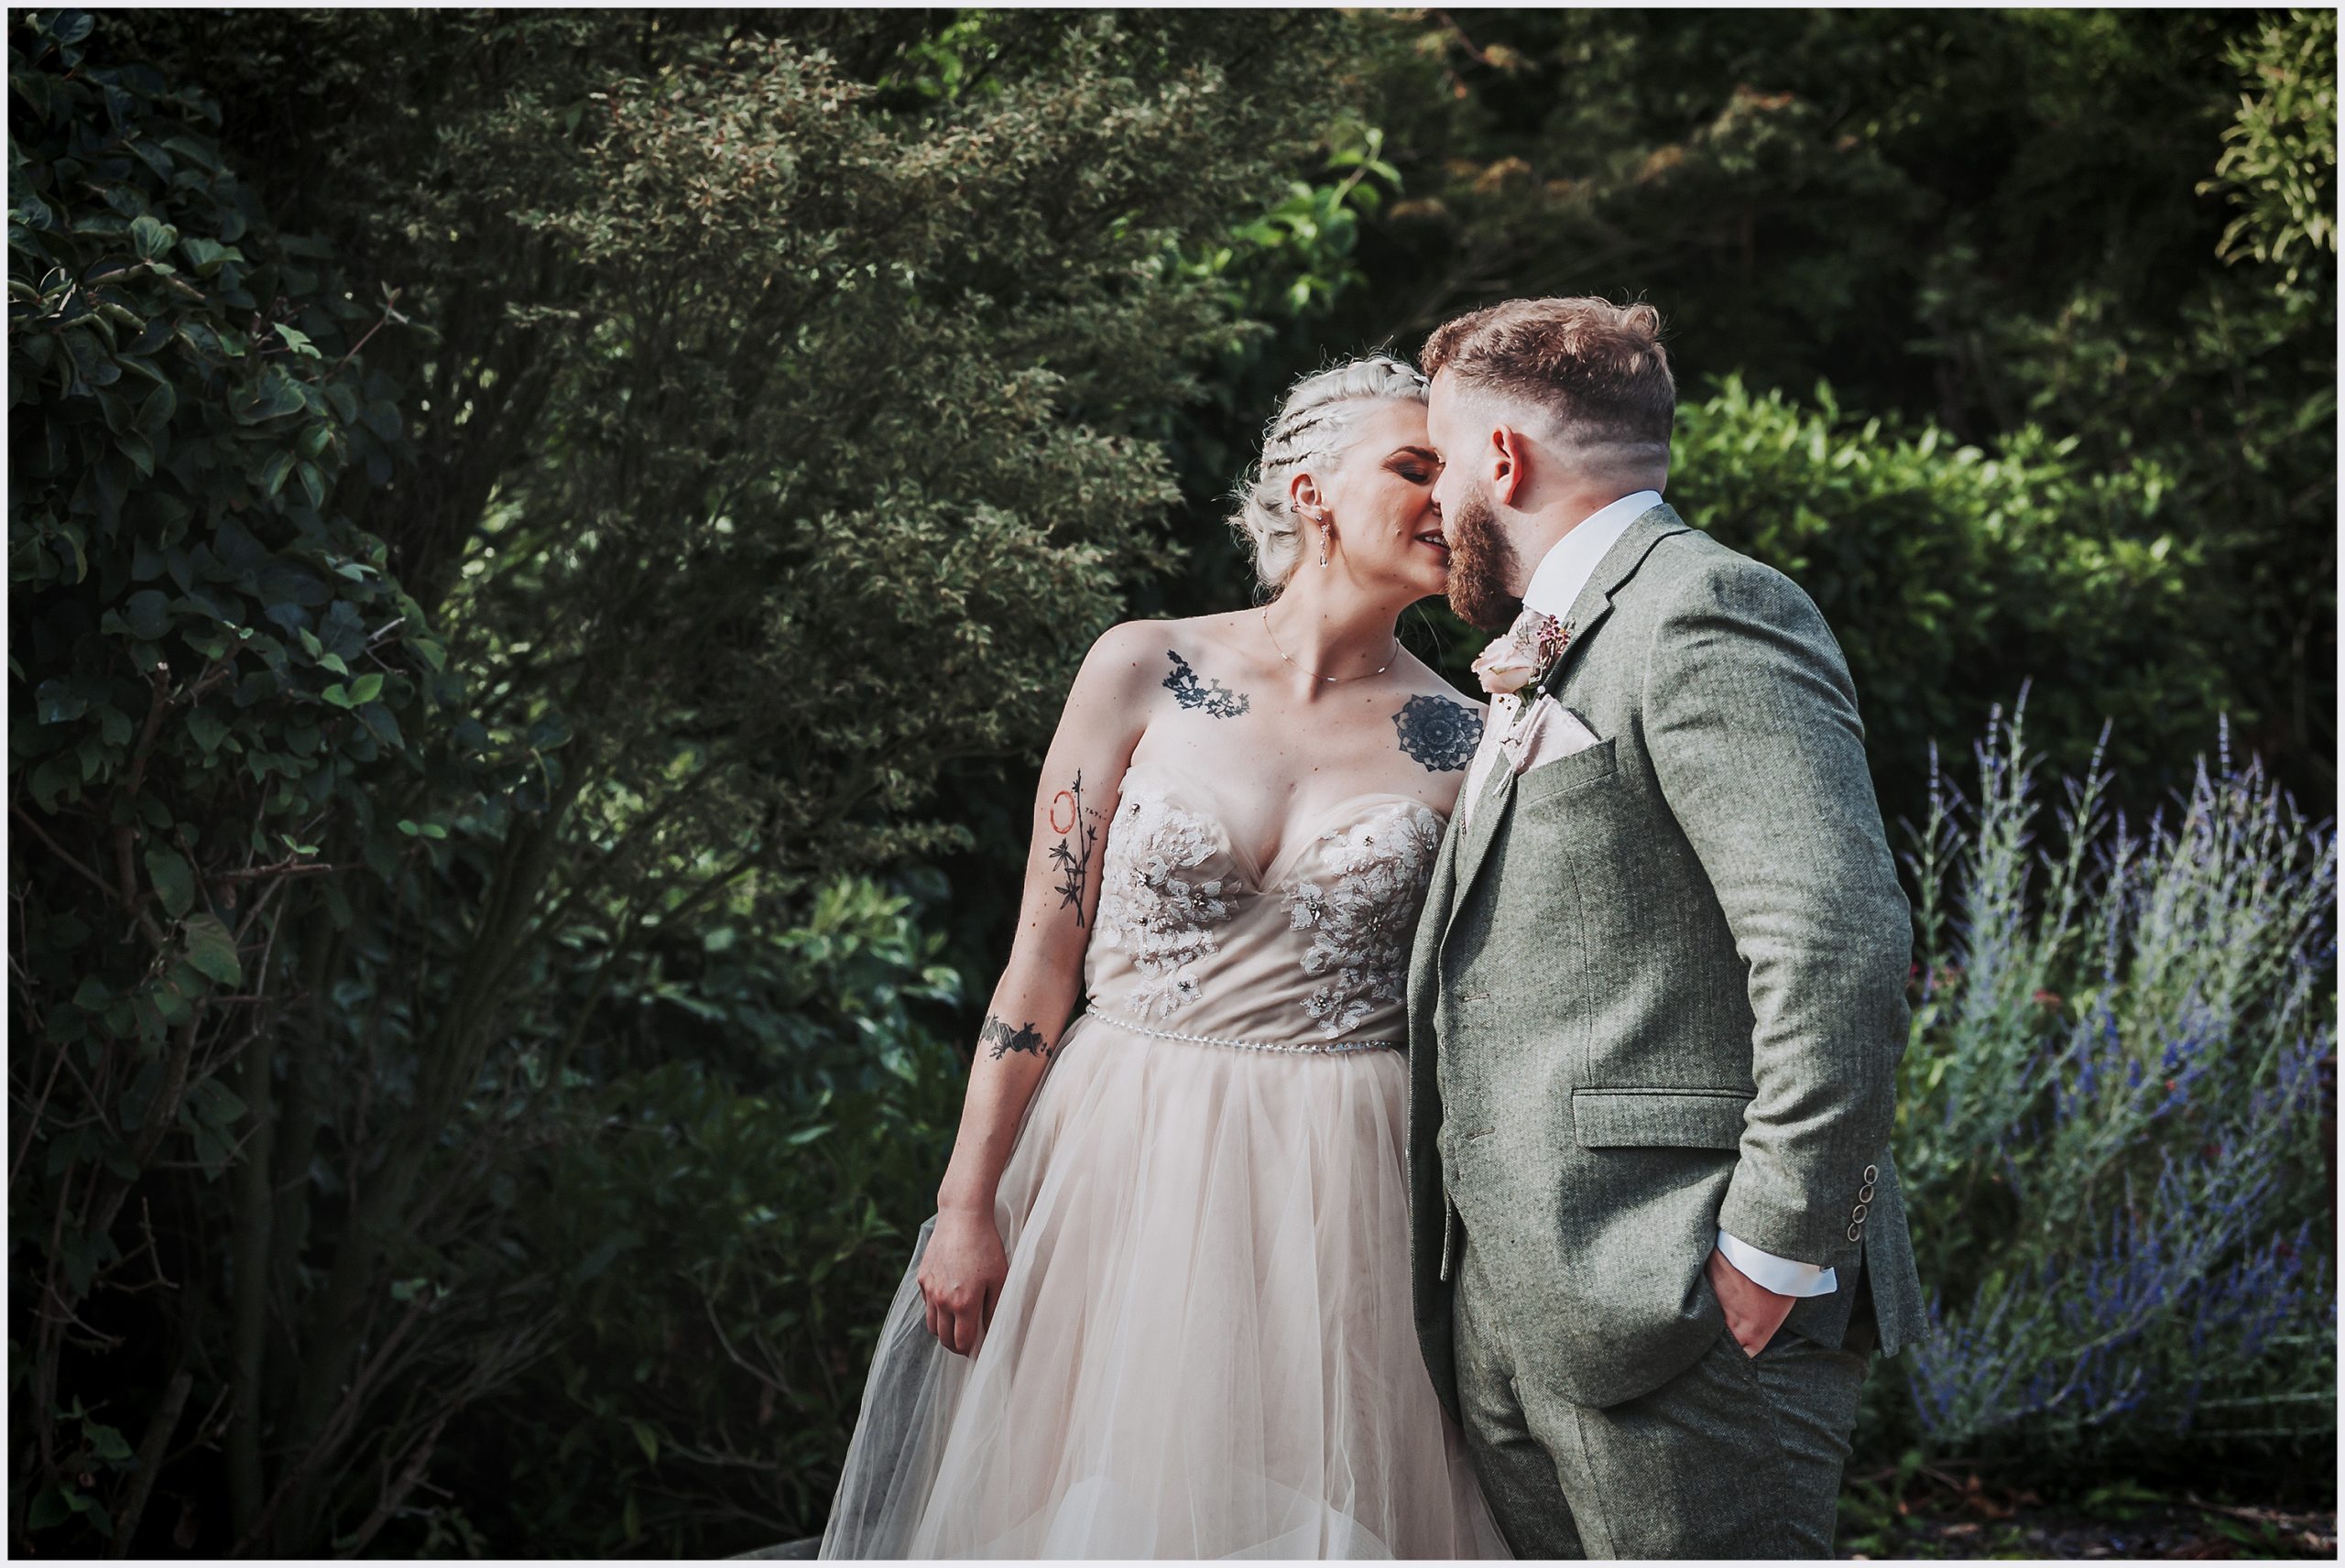 A bride and groom embrace in the Asian gardens at The Grosvenor Pulford Hotel and Spa.  Image captured by Helena Jayne Photography, Cheshire wedding photographer